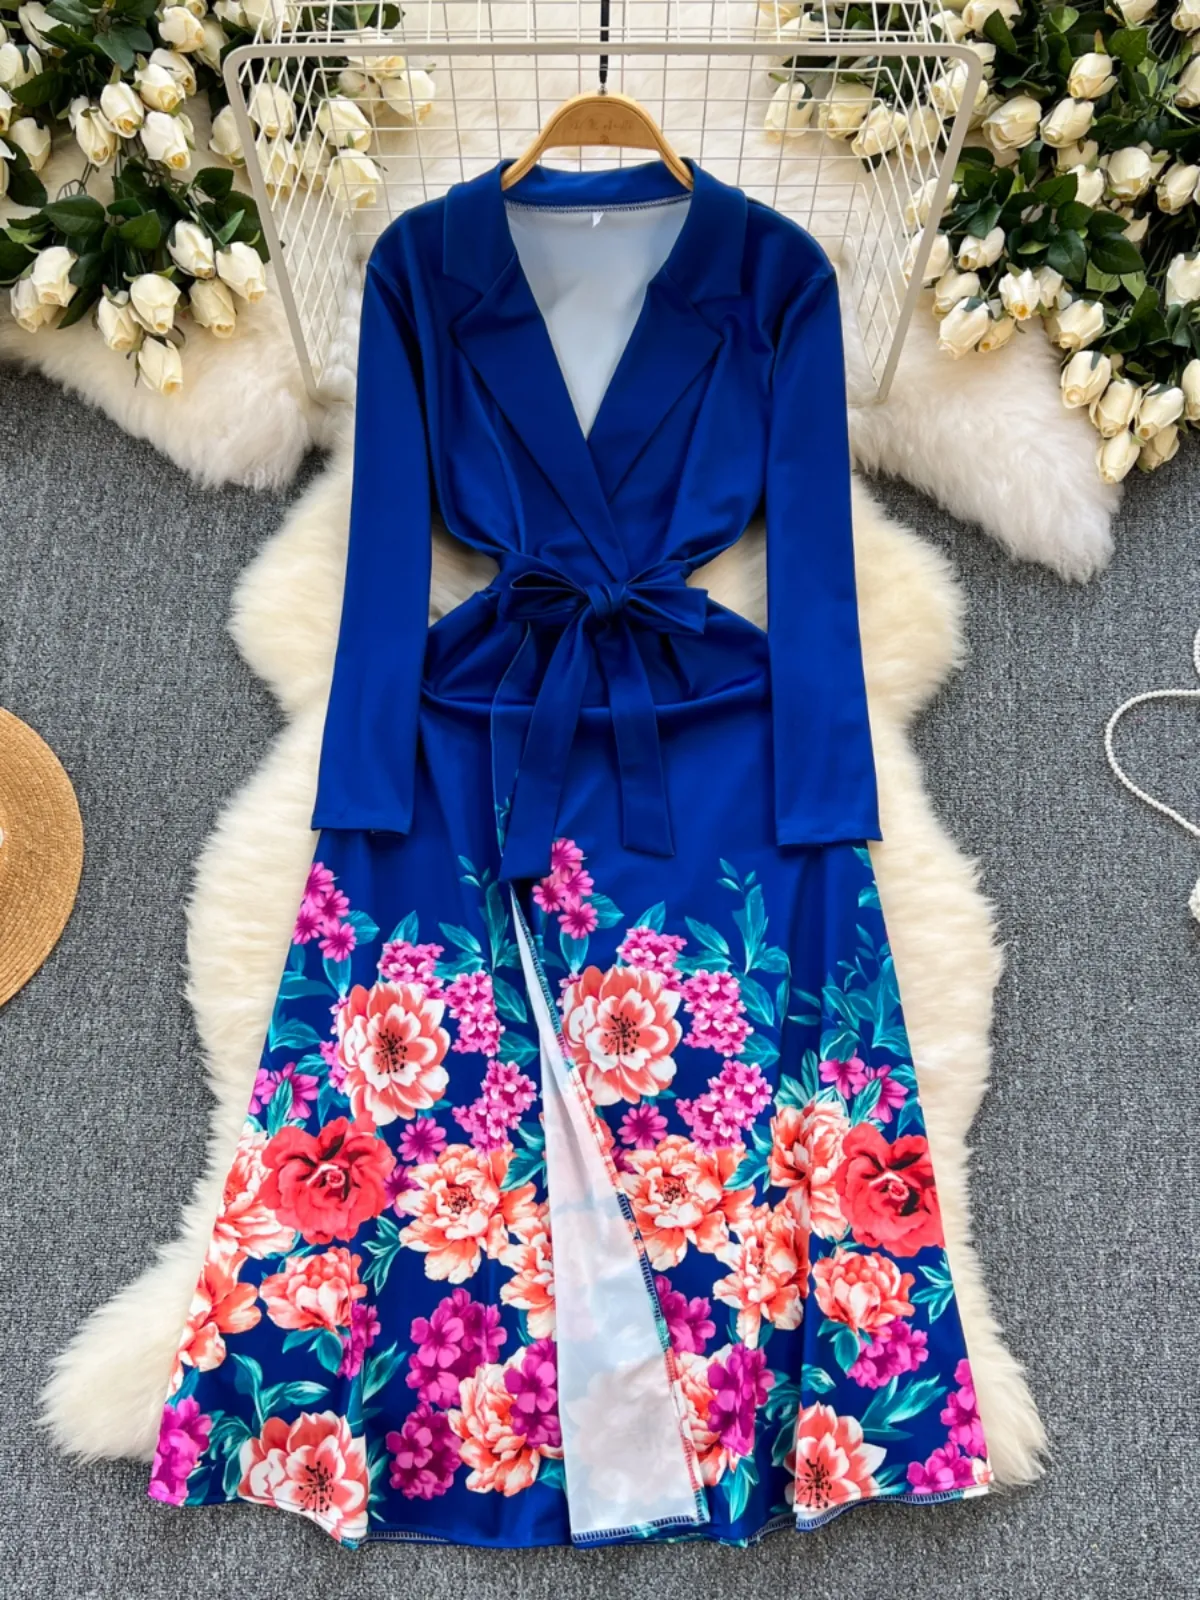 Light mature style women's temperament suit collar tie waist slimming mid length design with printed dress for women's summer wear